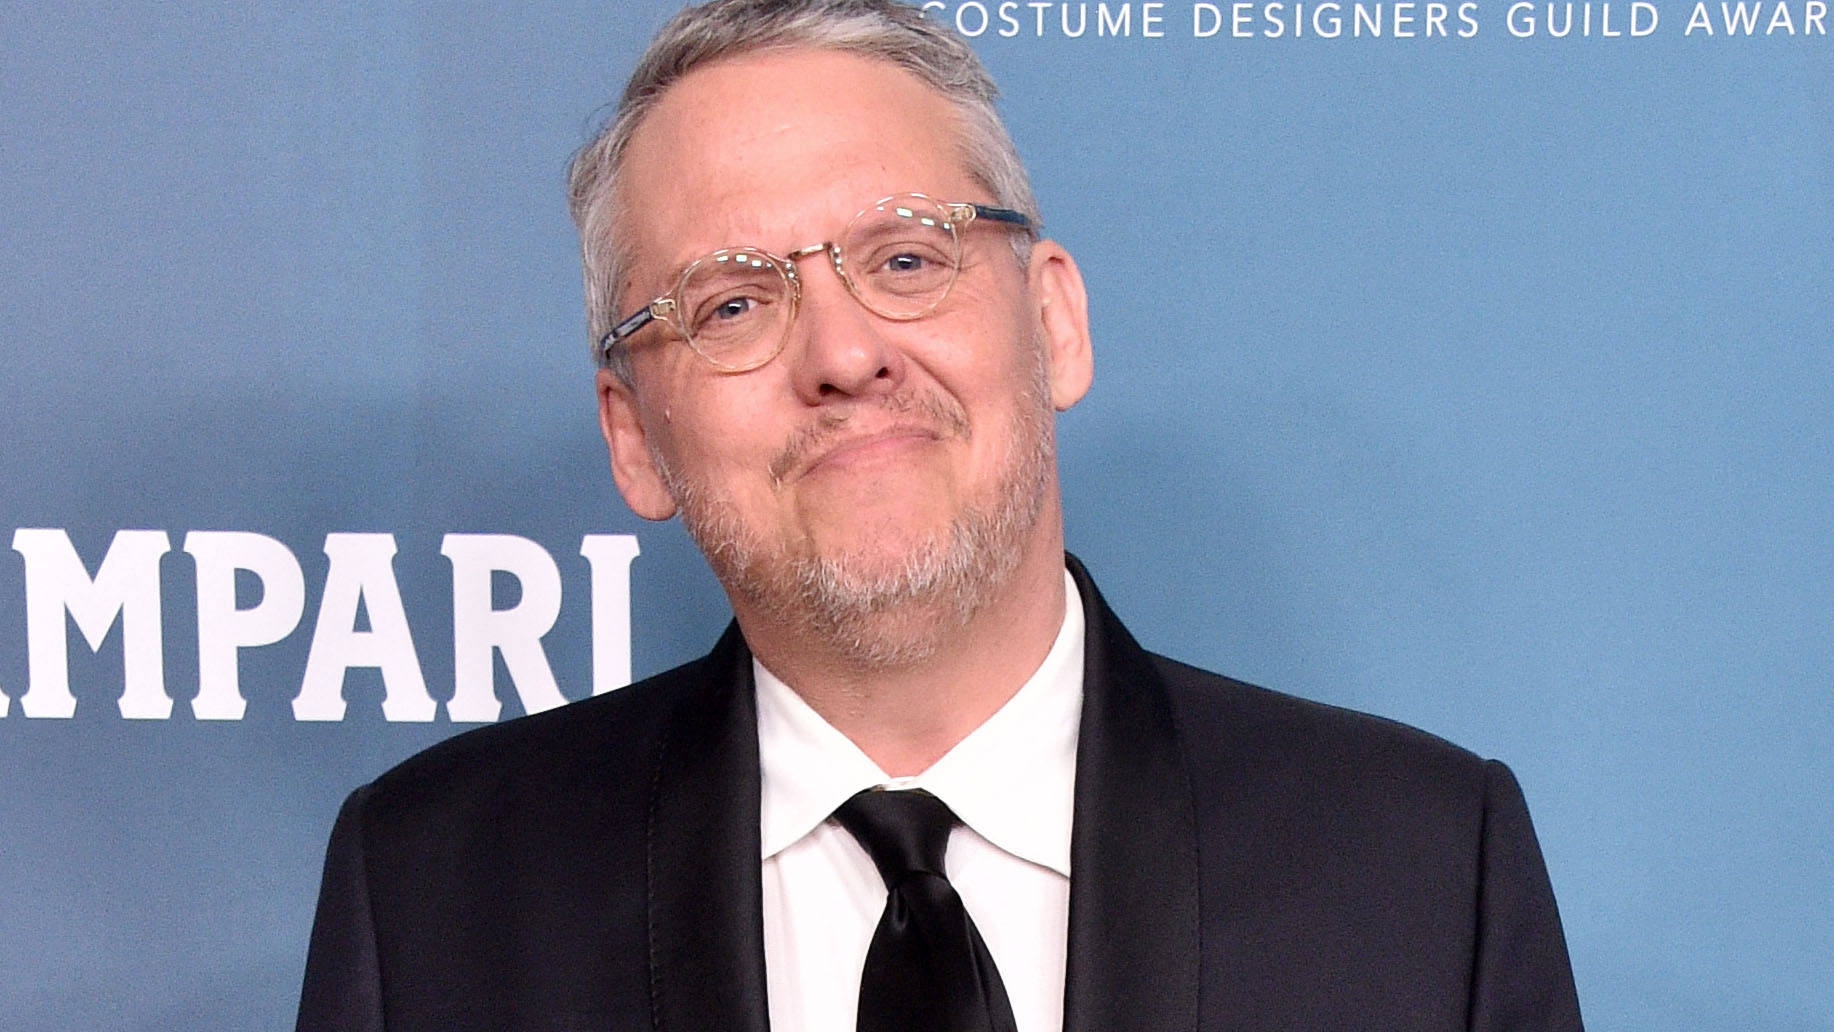 Adam McKay is one of the main characters